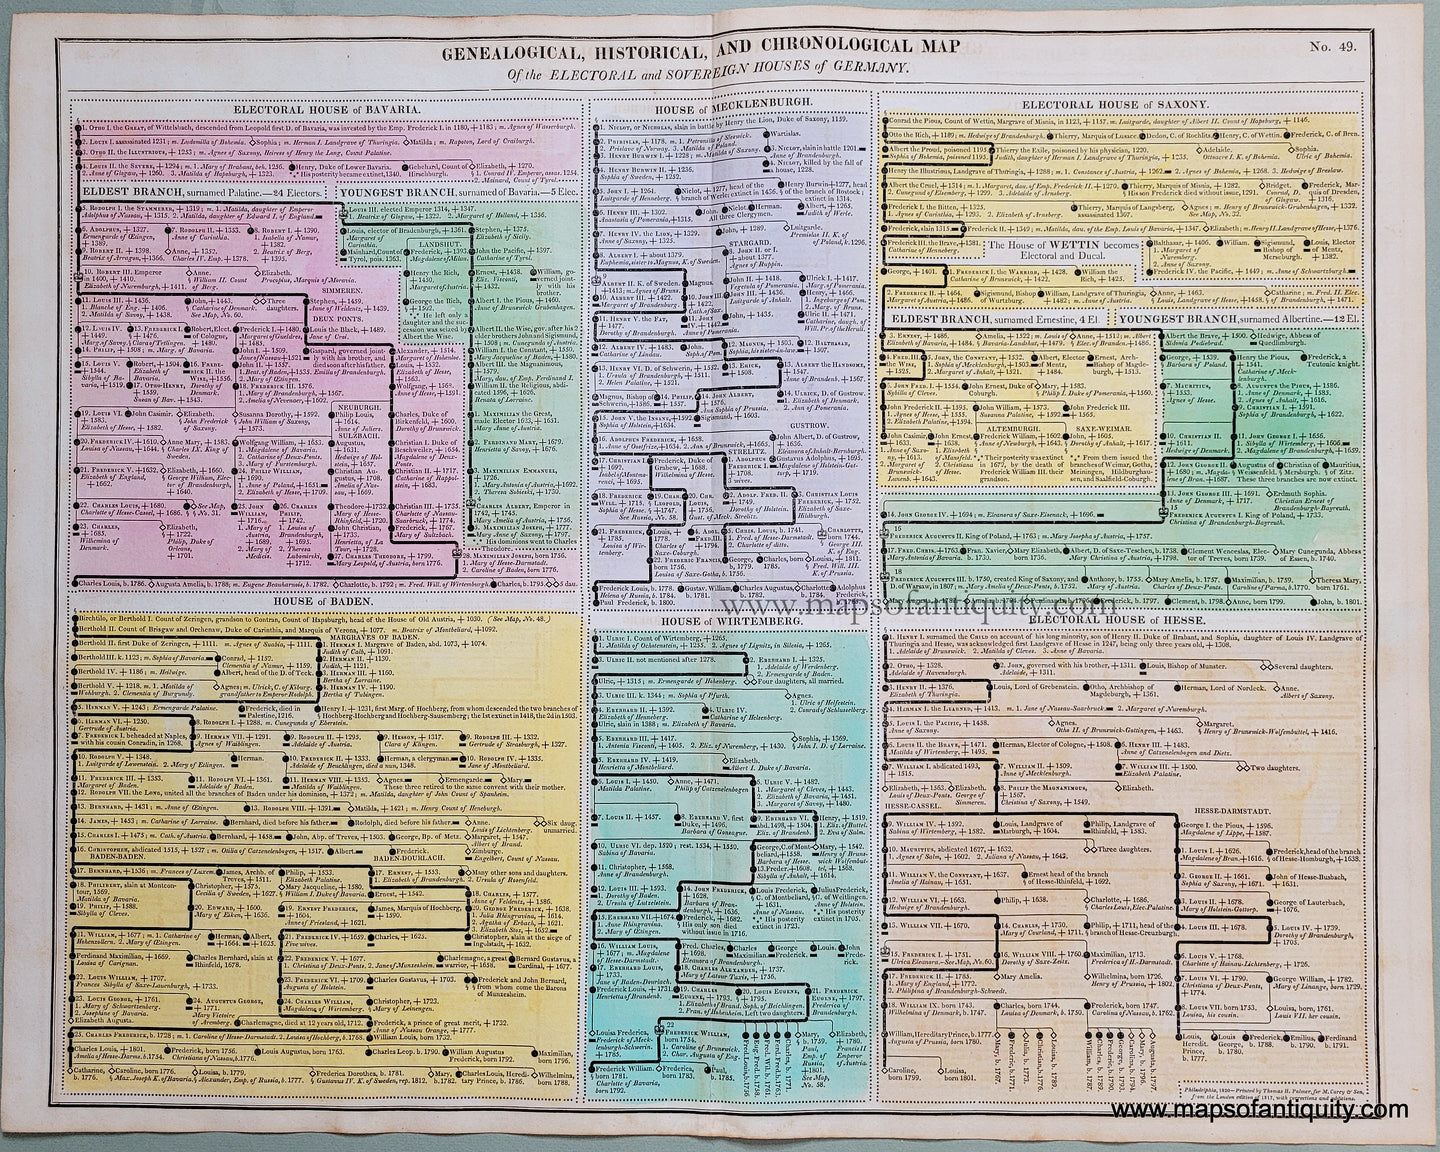 Hand-Colored-Antique-Timeline-Geneological-Historical-and-Chronological-Map-of-the-Electoral-and-Sovereign-Houses-of-Germany.-No.-49.-History-of-the-Electoral-Houses-of-Germany.-No.-50.-******-Europe-Germany-1821-Lavoisne-Maps-Of-Antiquity